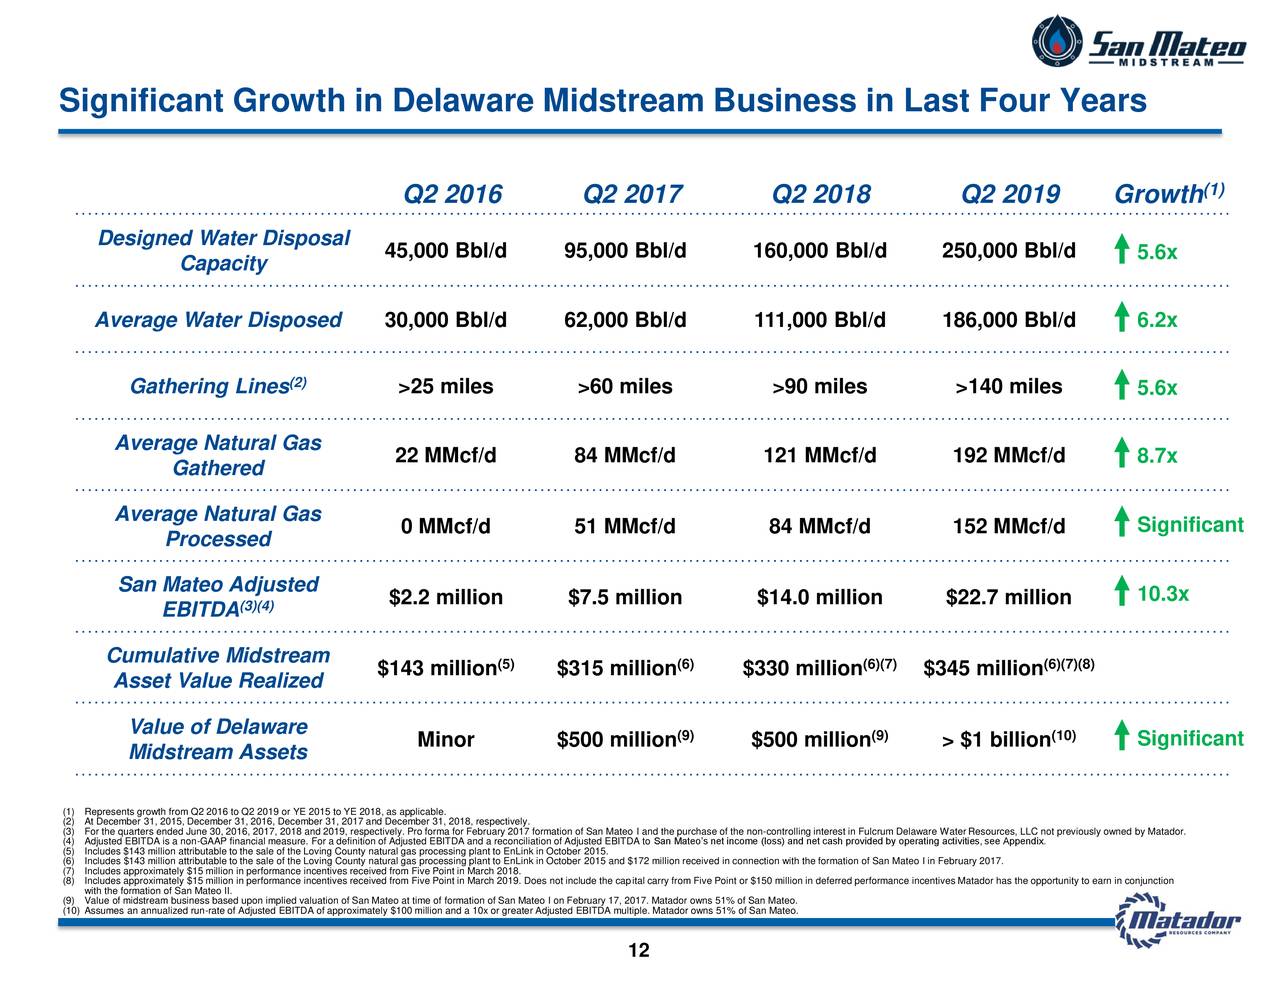 Significant Growth in Delaware Midstream Business in Last Four Years